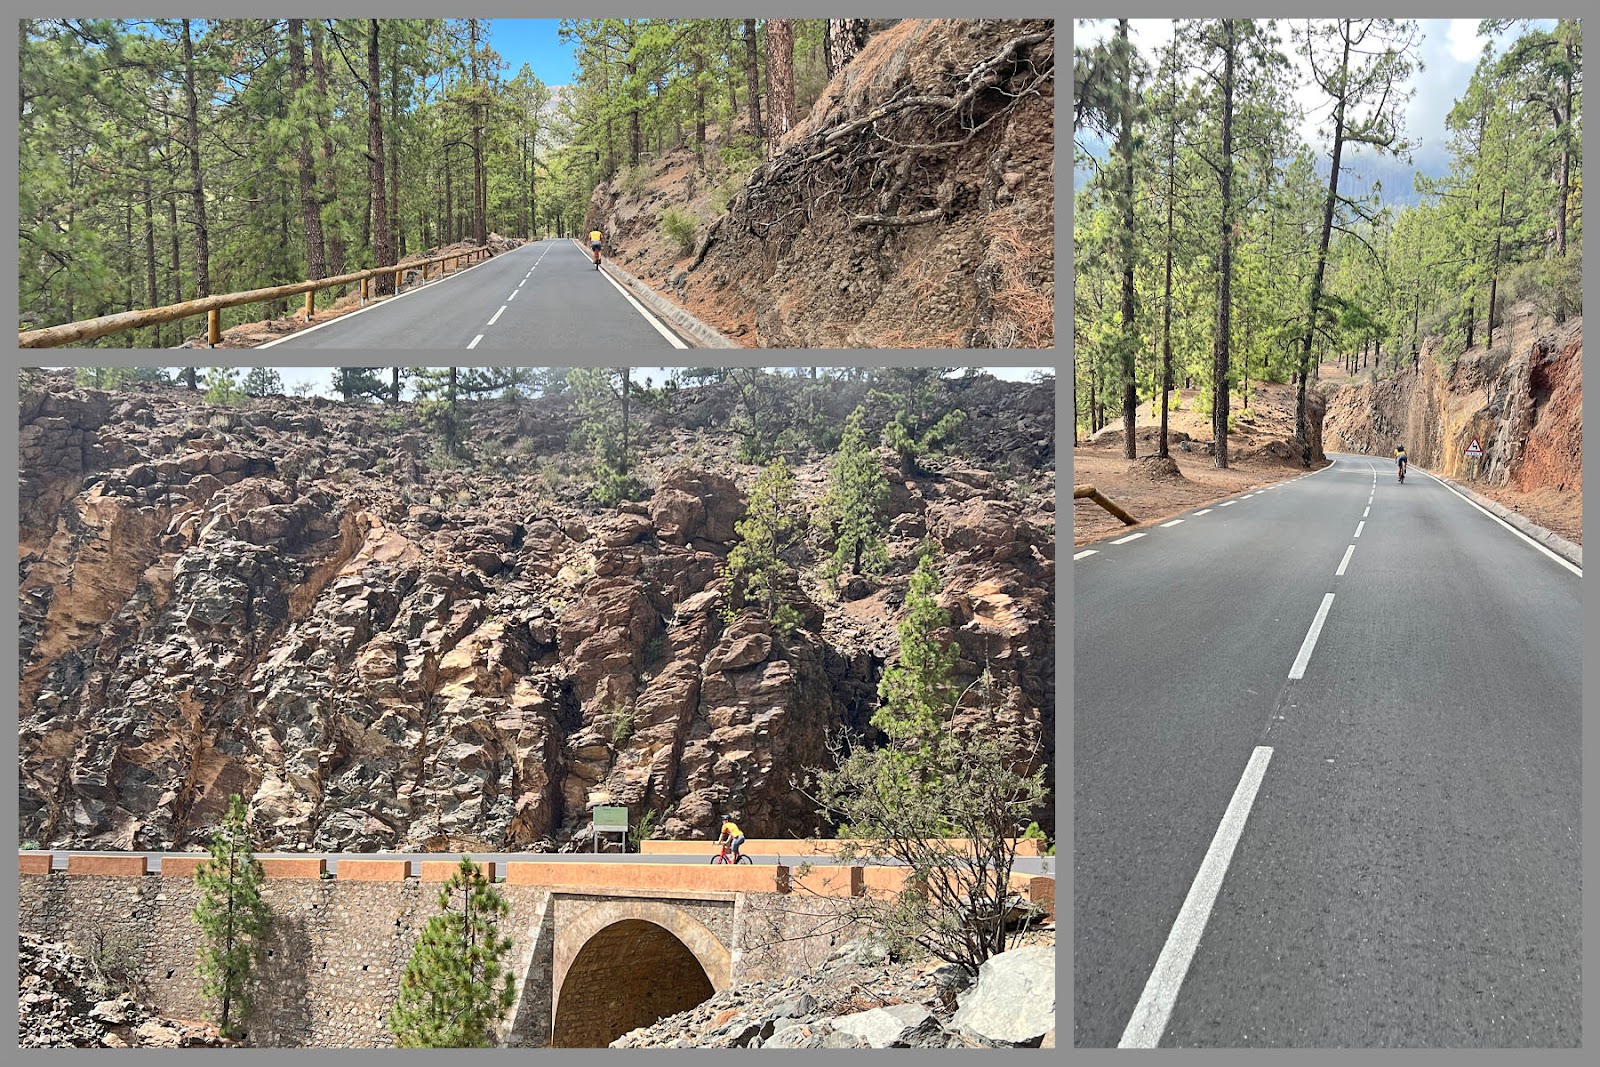 photo collage shows two-lane highway roadway passing through alpine setting, craggy rocks